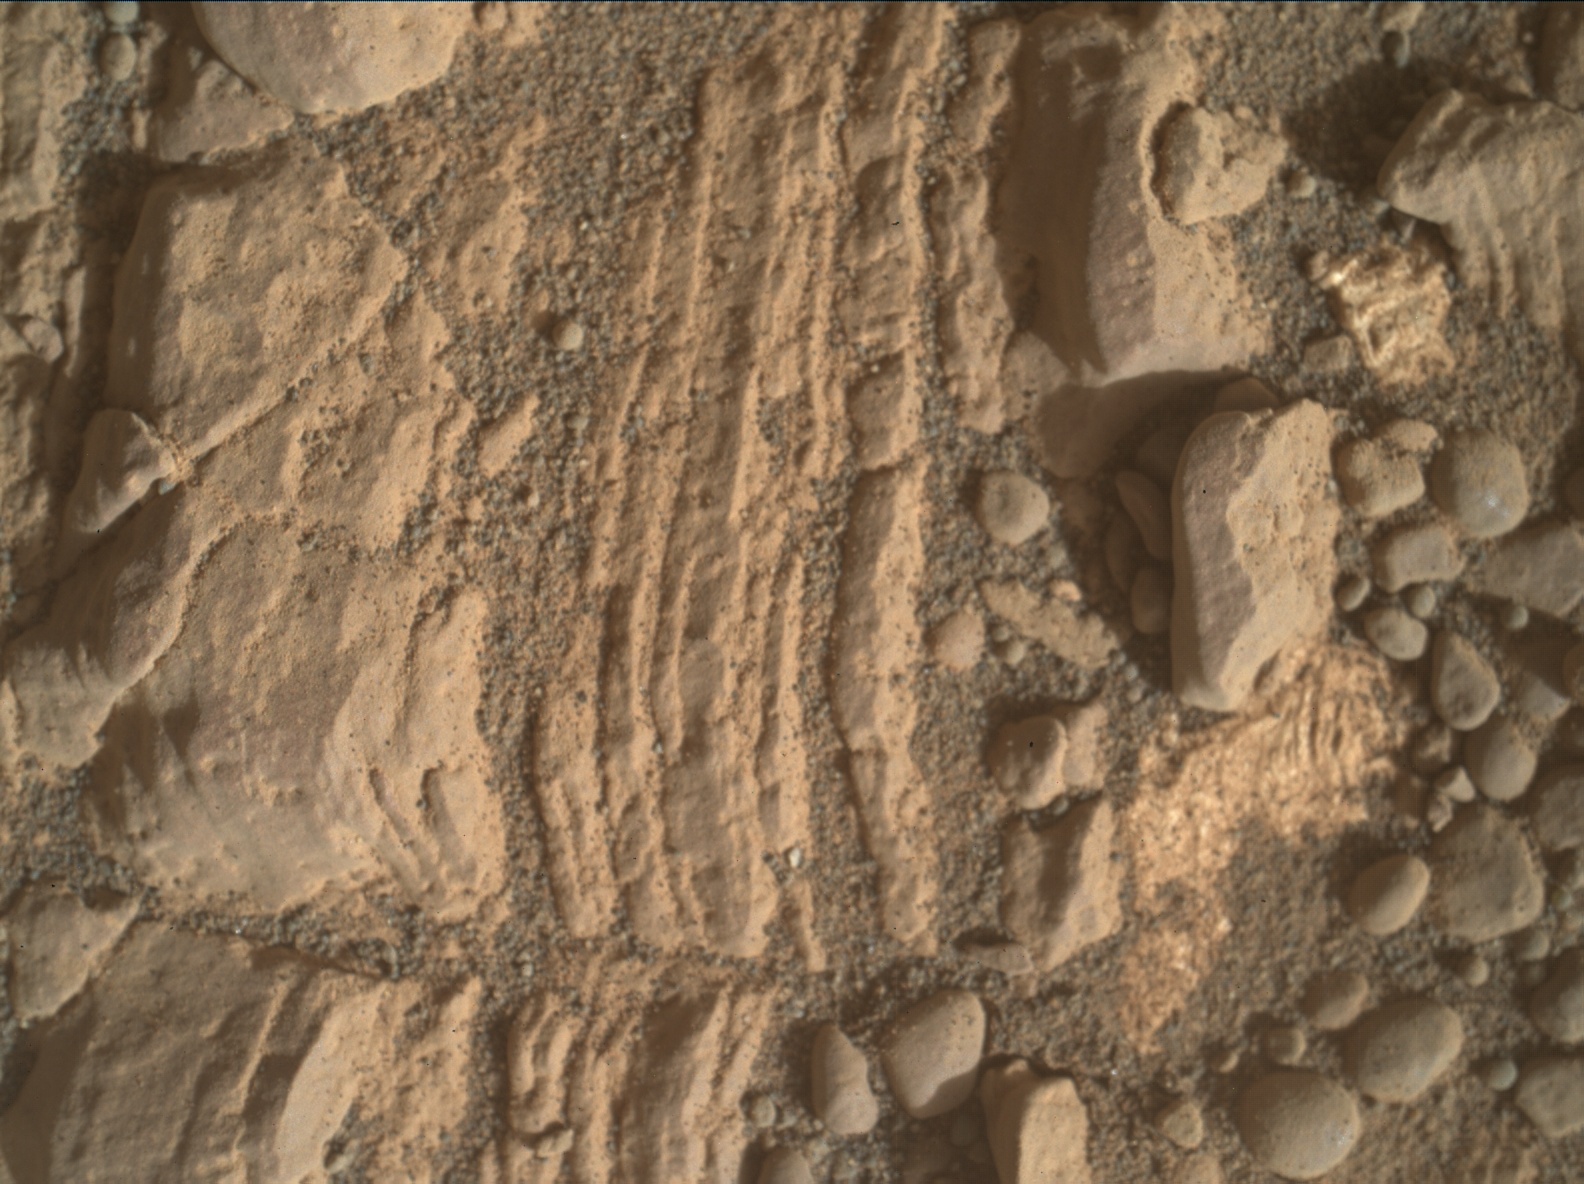 Nasa's Mars rover Curiosity acquired this image using its Mars Hand Lens Imager (MAHLI) on Sol 2424